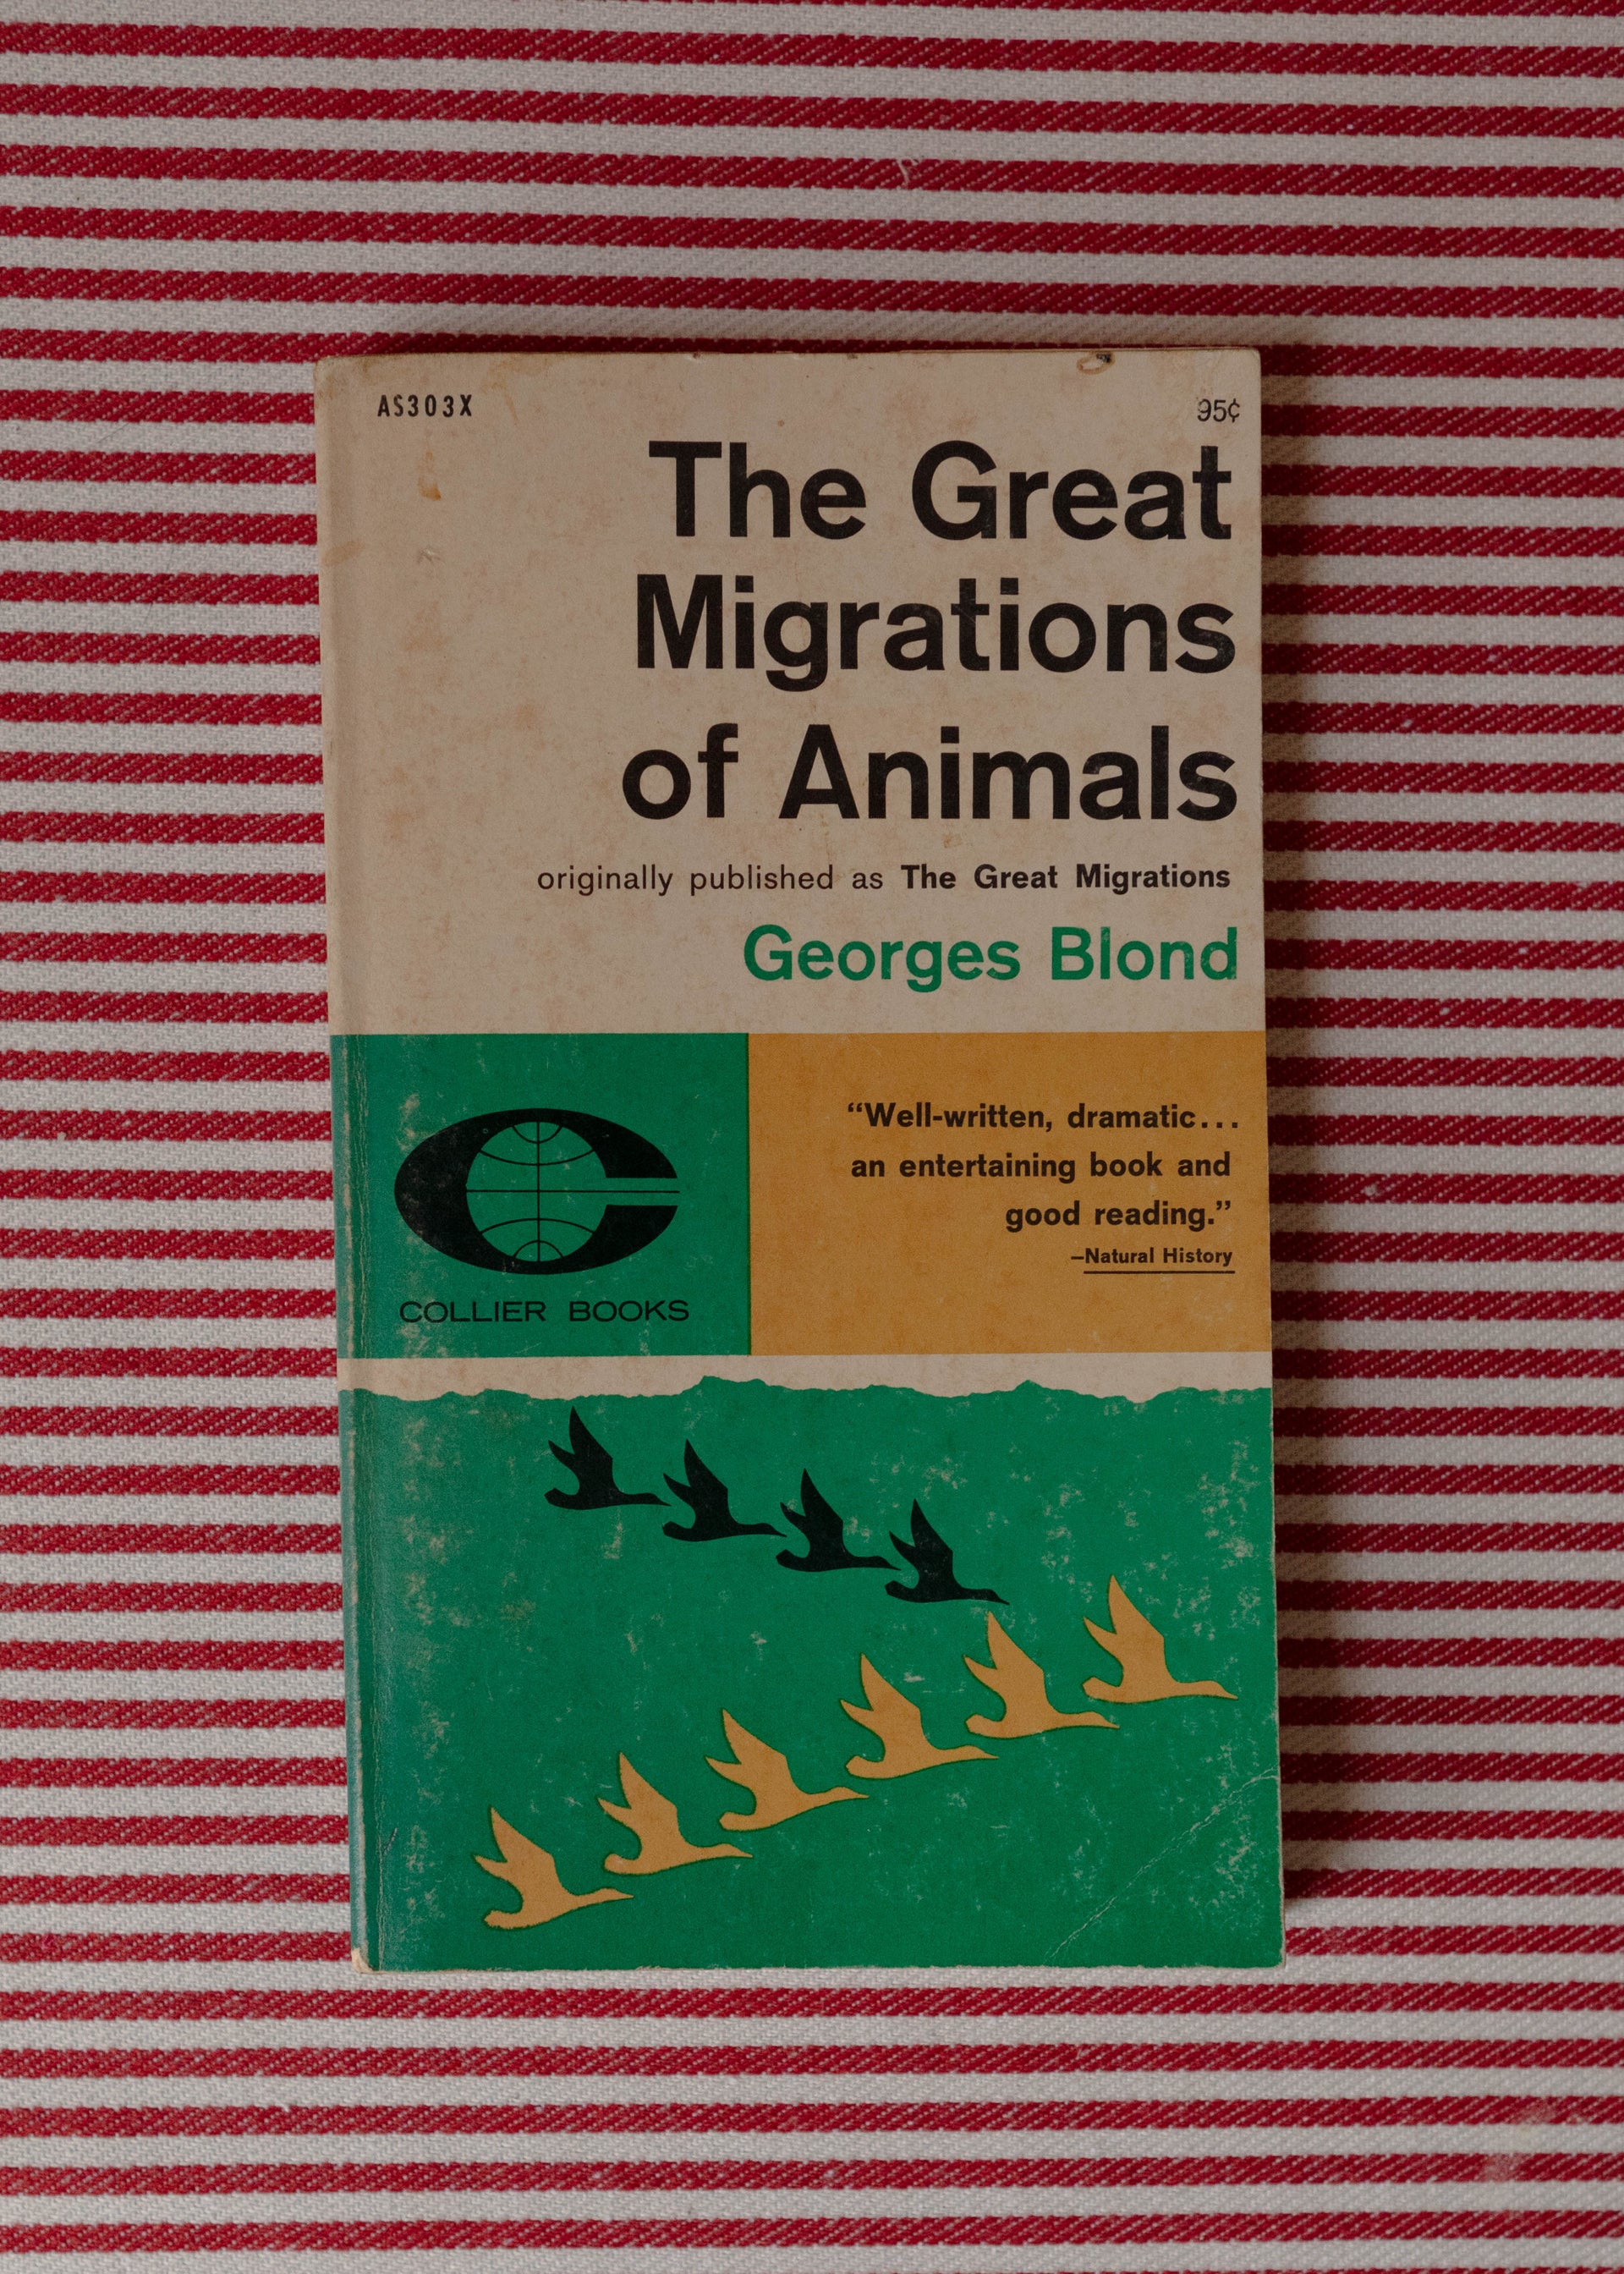 The Great Migrations of Animals